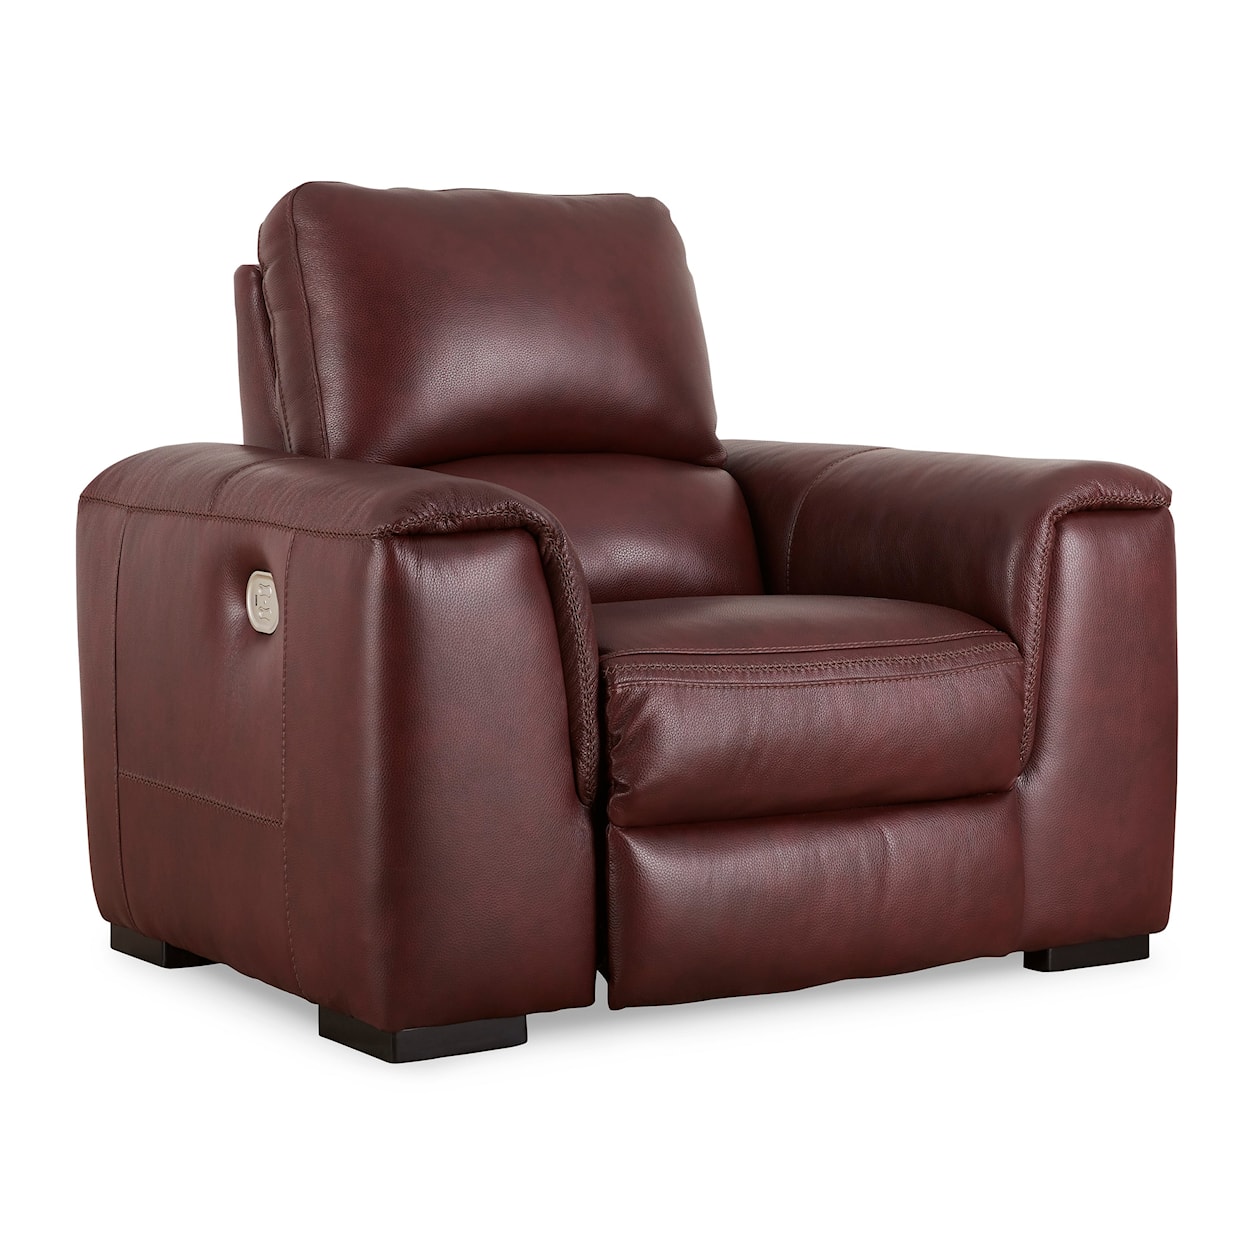 Signature Design by Ashley Furniture Alessandro Power Recliner